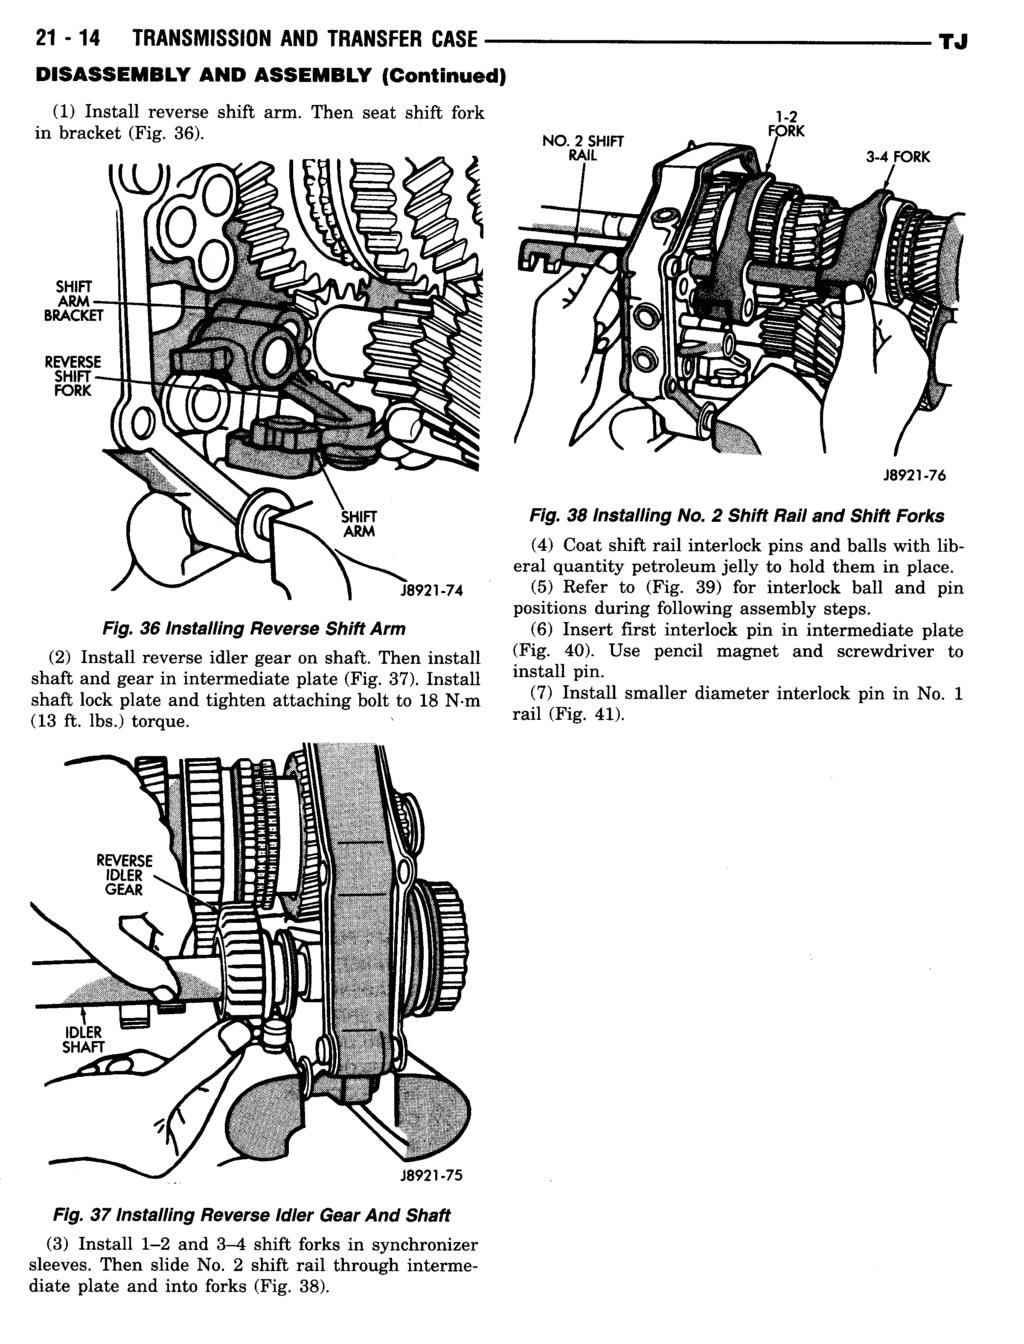 21-14 TRANSMISSION AND TRANSFER CASE (1) Install reverse shift arm. Then seat shift fork in bracket (Fig. 36). J8921-76 38 Installing No.